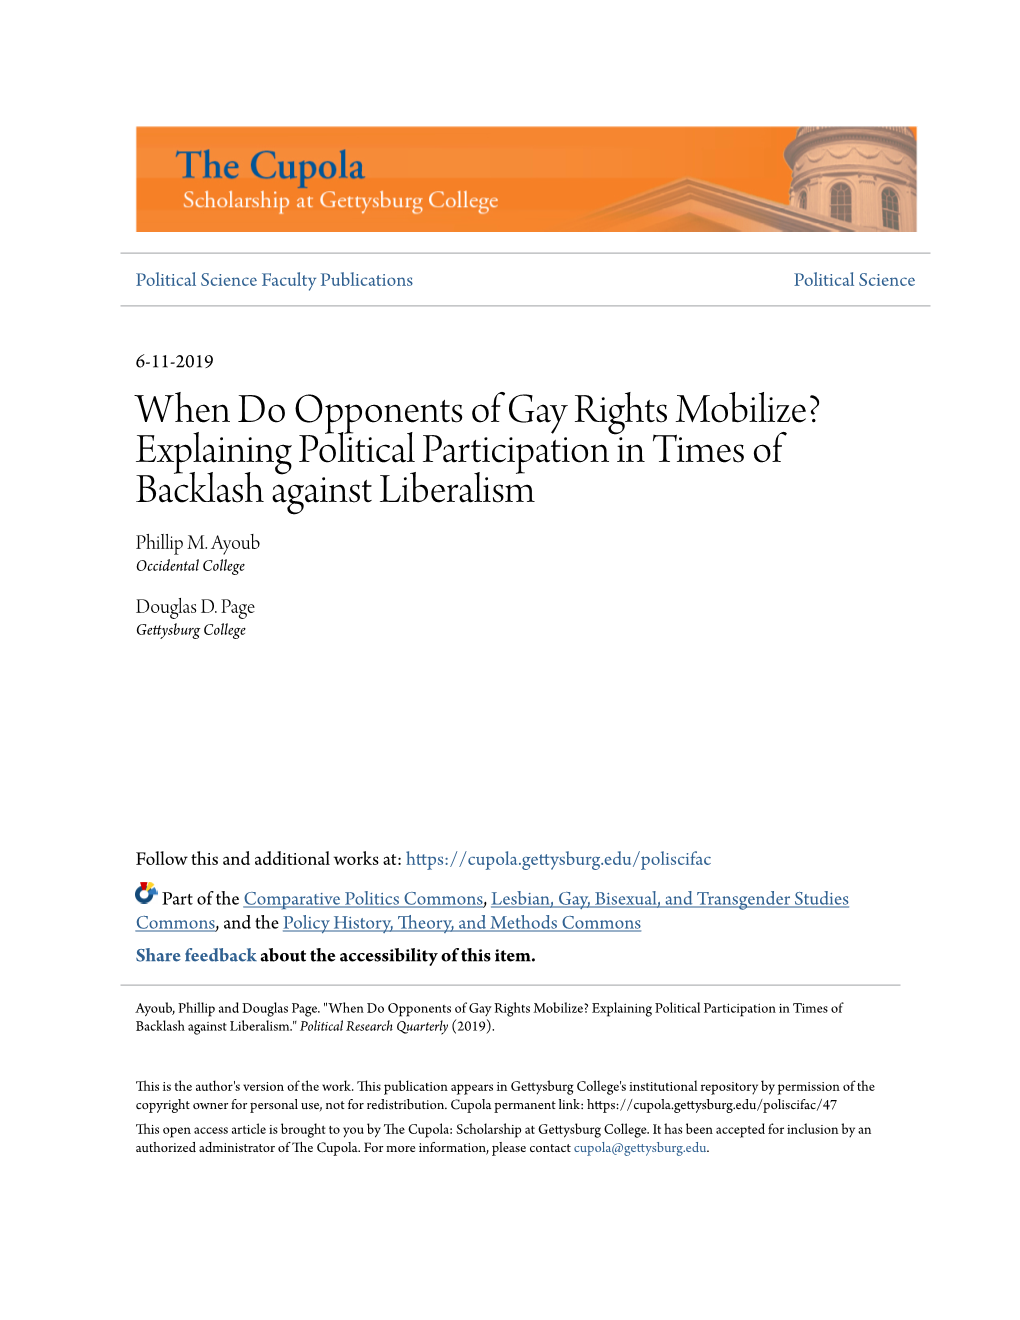 When Do Opponents of Gay Rights Mobilize? Explaining Political Participation in Times of Backlash Against Liberalism Phillip M